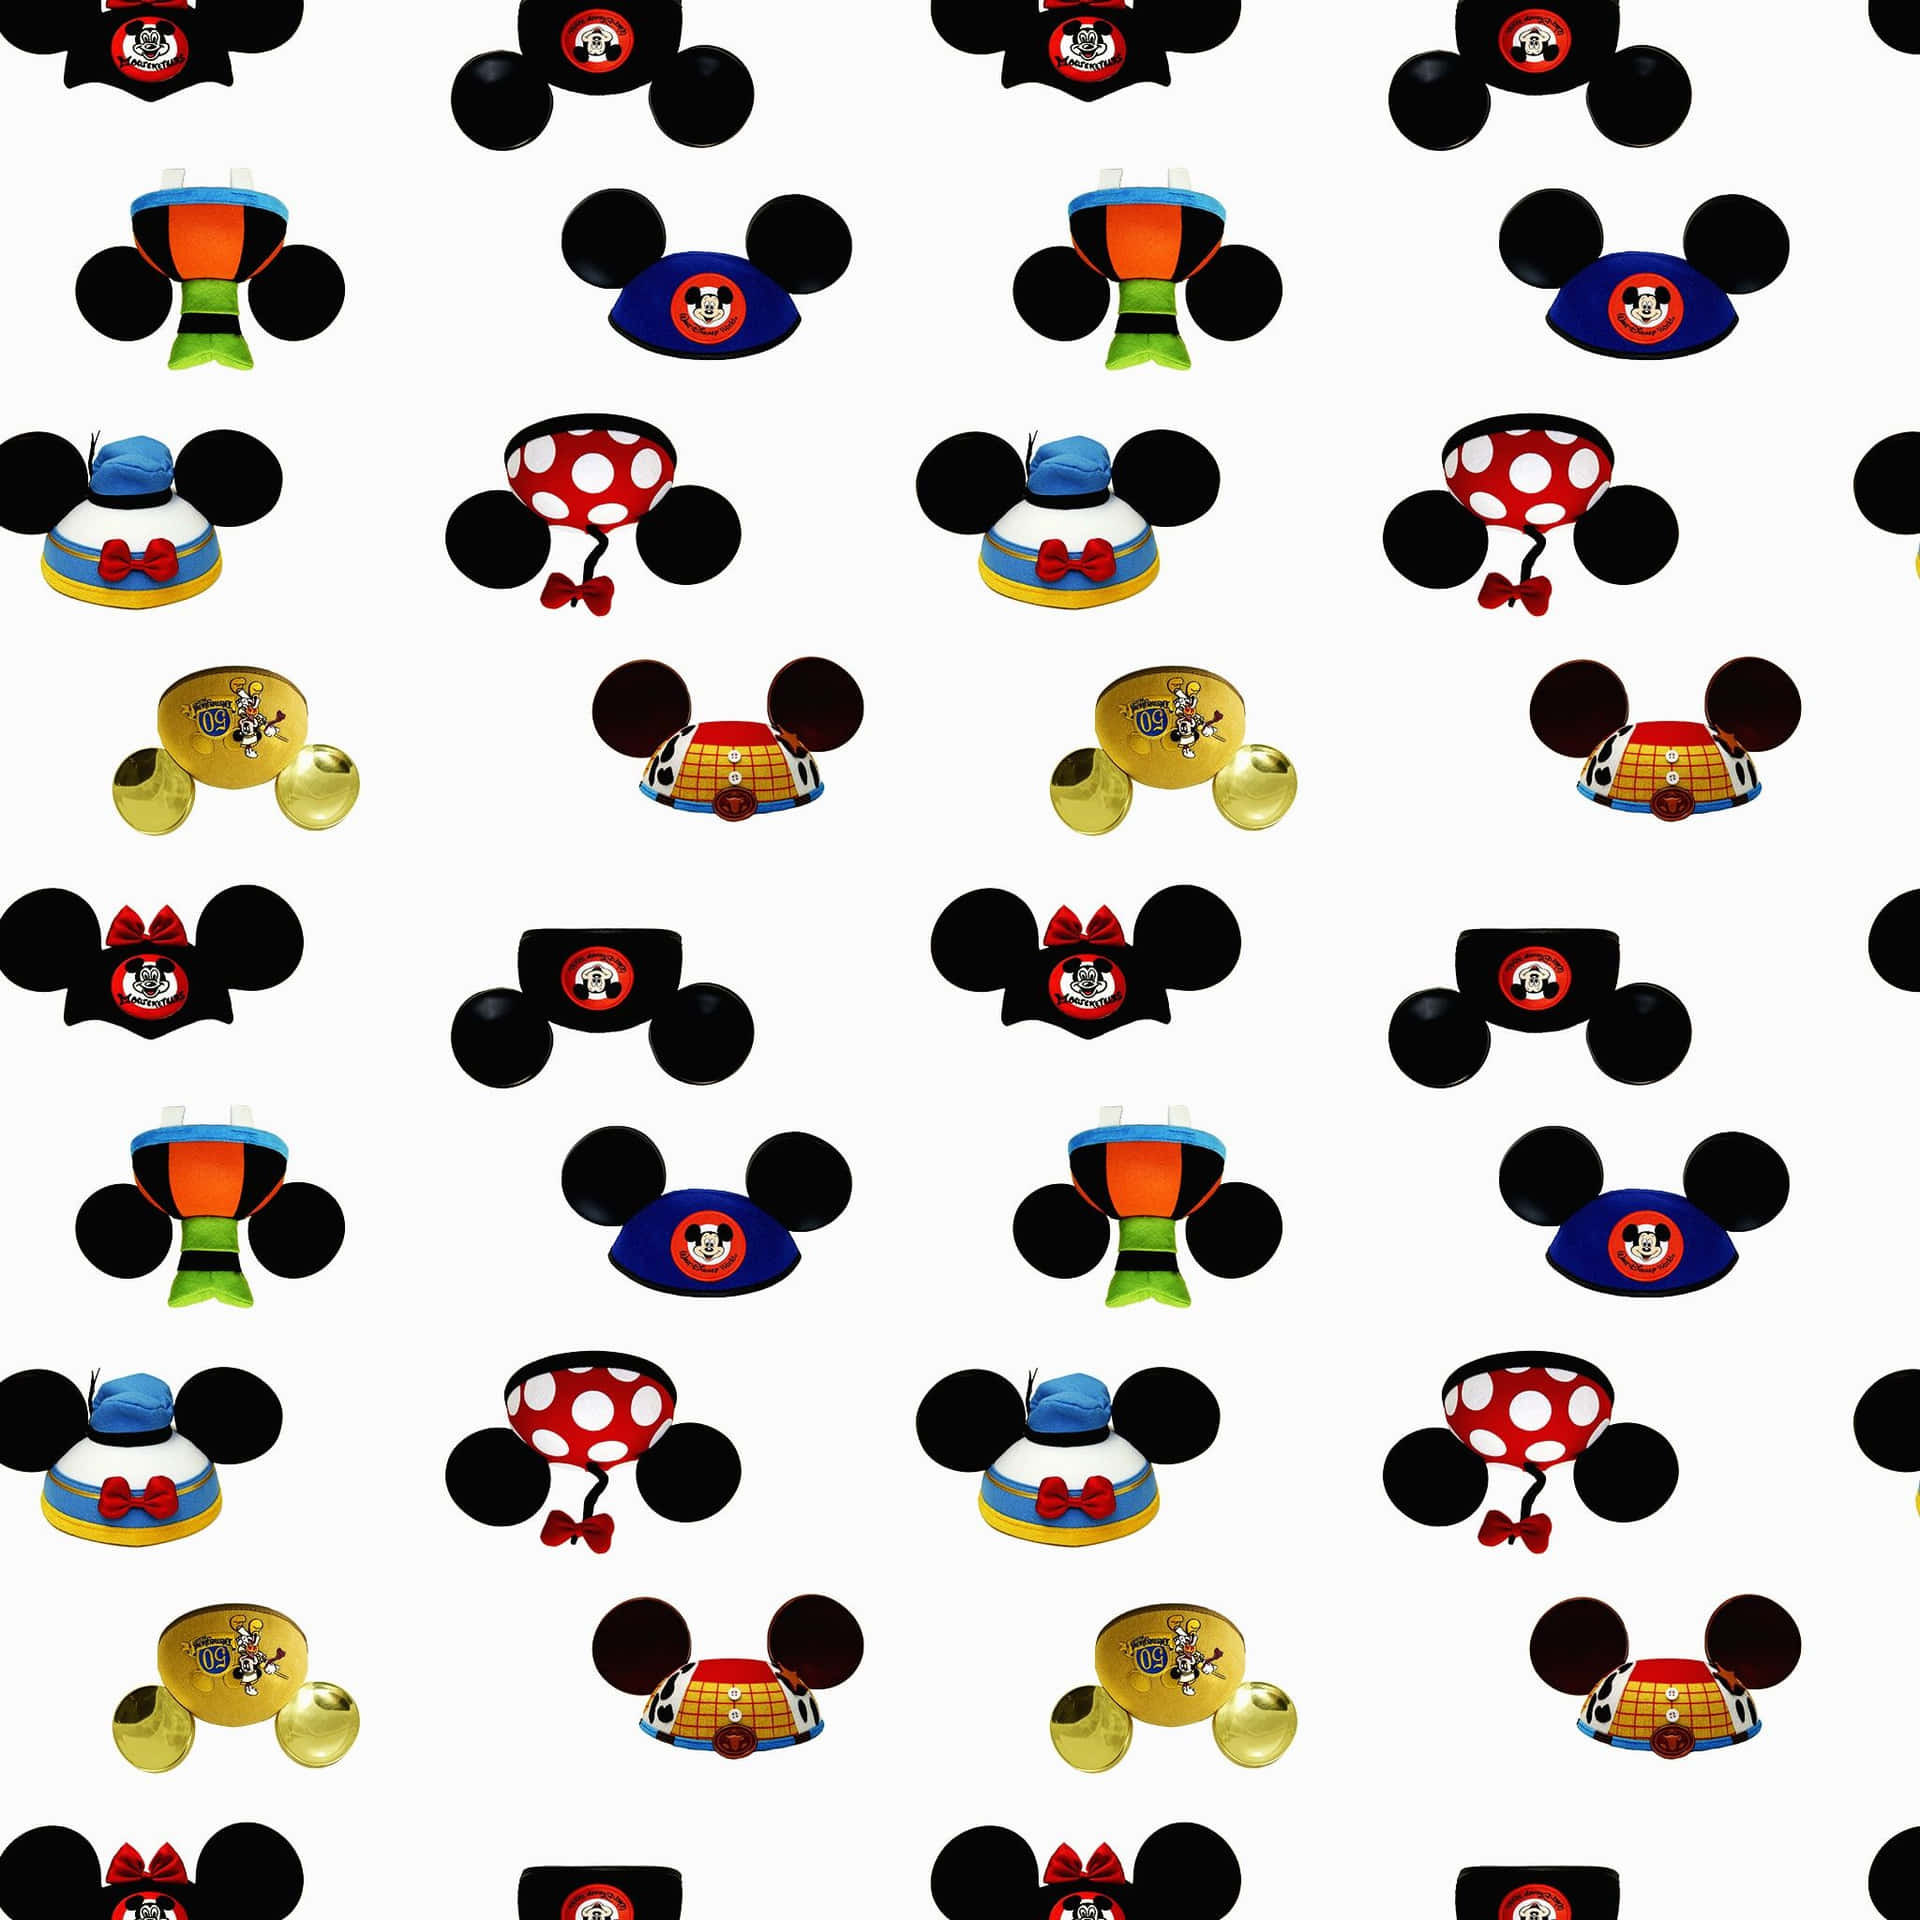 Get ready to make magical memories with this iconic set of Mickey Mouse Ears! Wallpaper